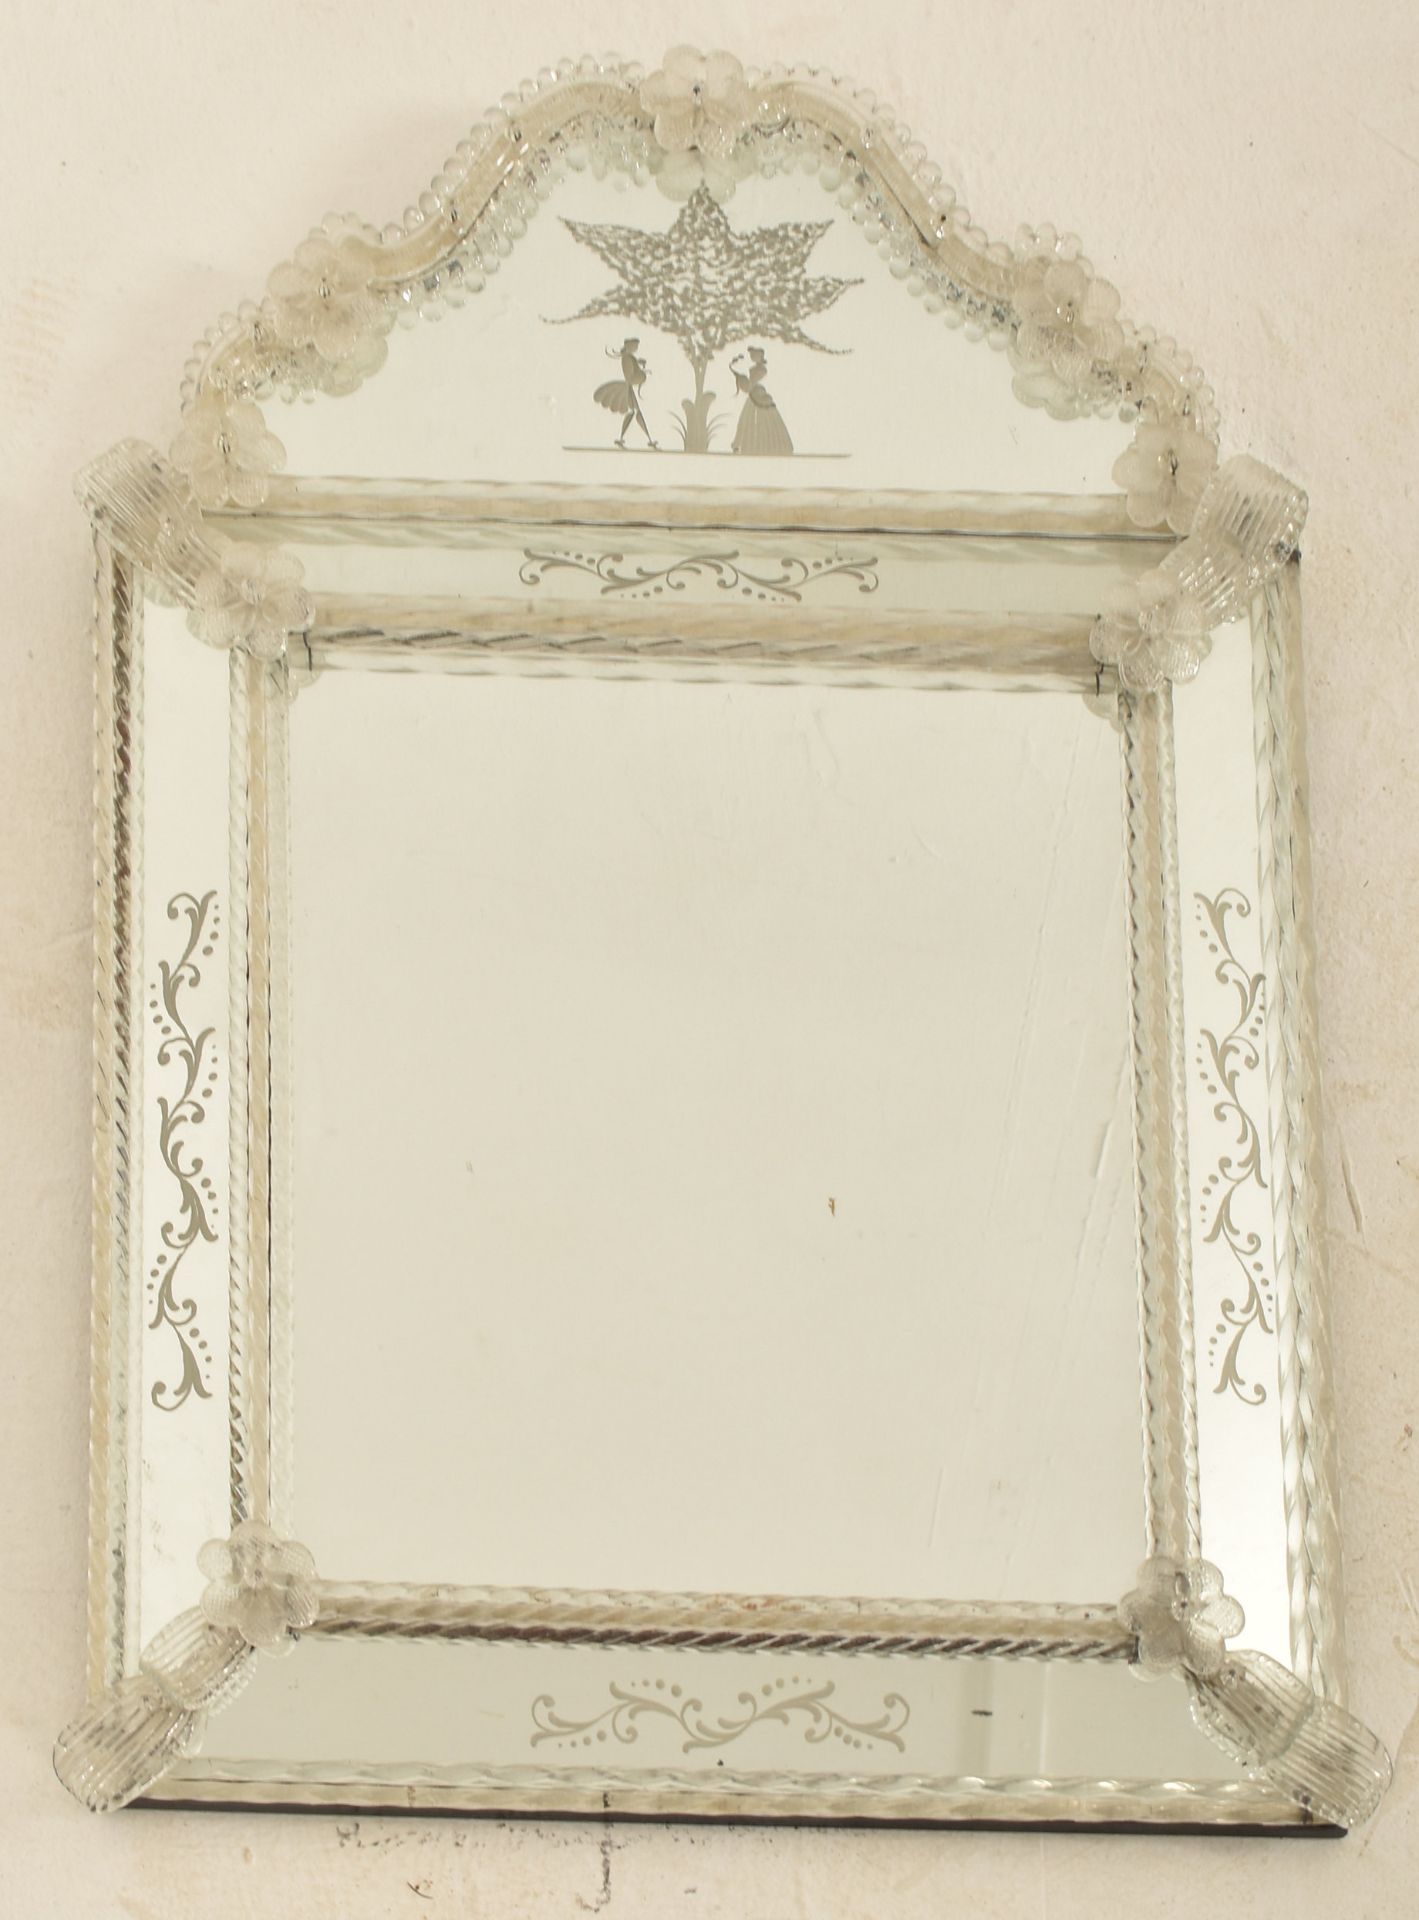 VENETIAN PALAZZO ETCHED GLASS WALL HANGING MIRROR